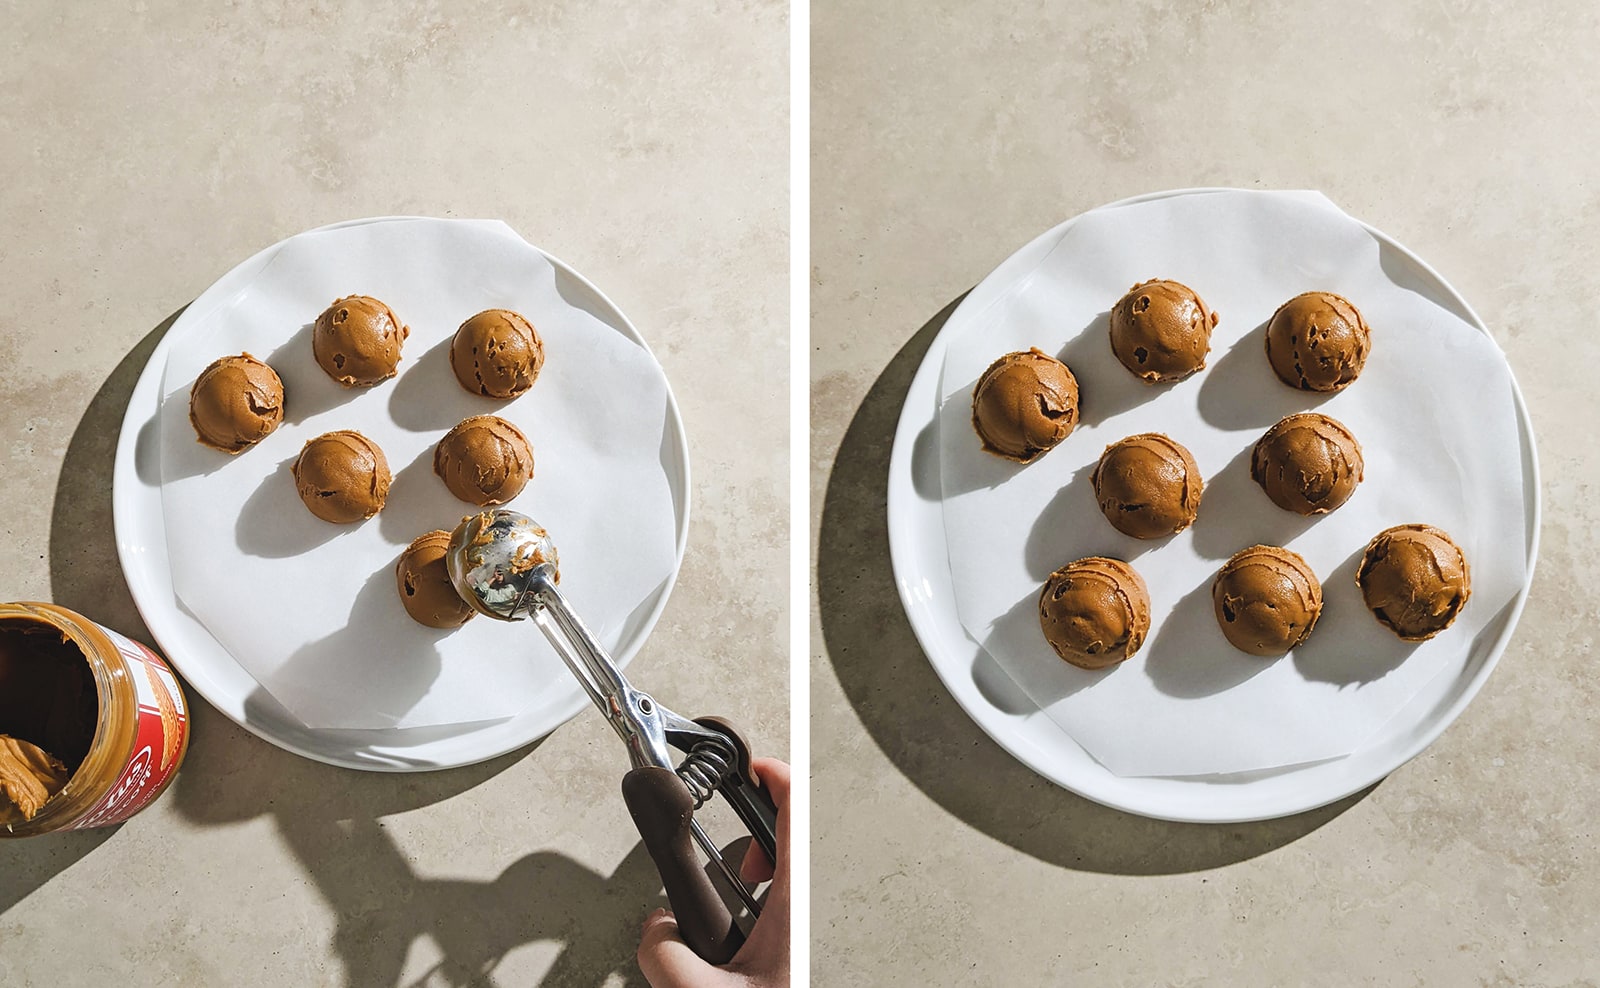 Scooping out small balls of biscoff spread onto a plate.